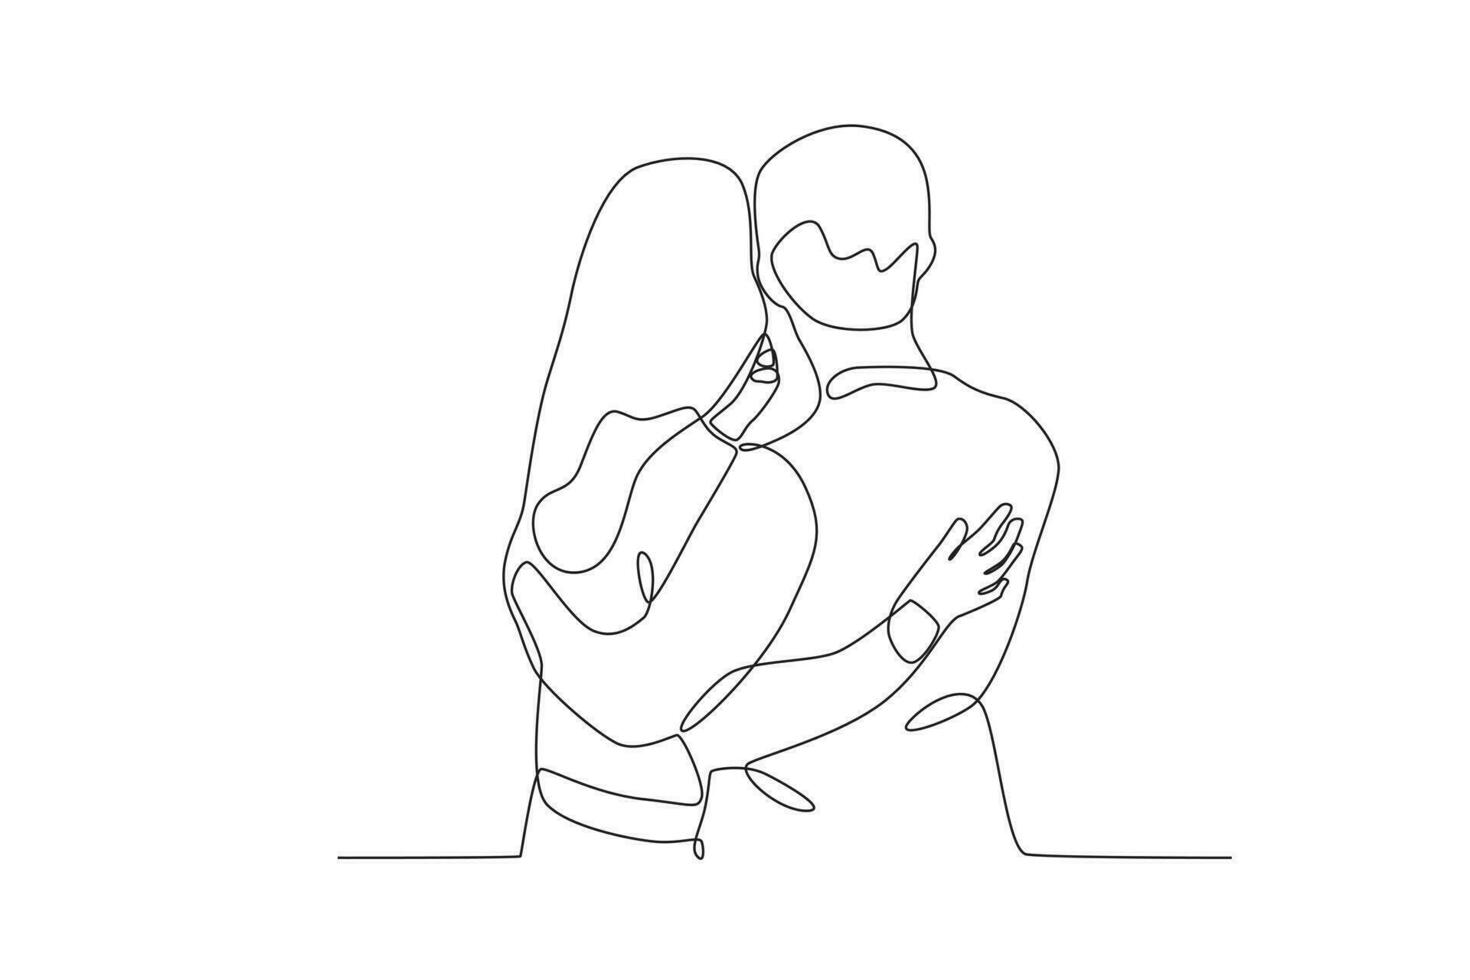 A couple hugging back view vector